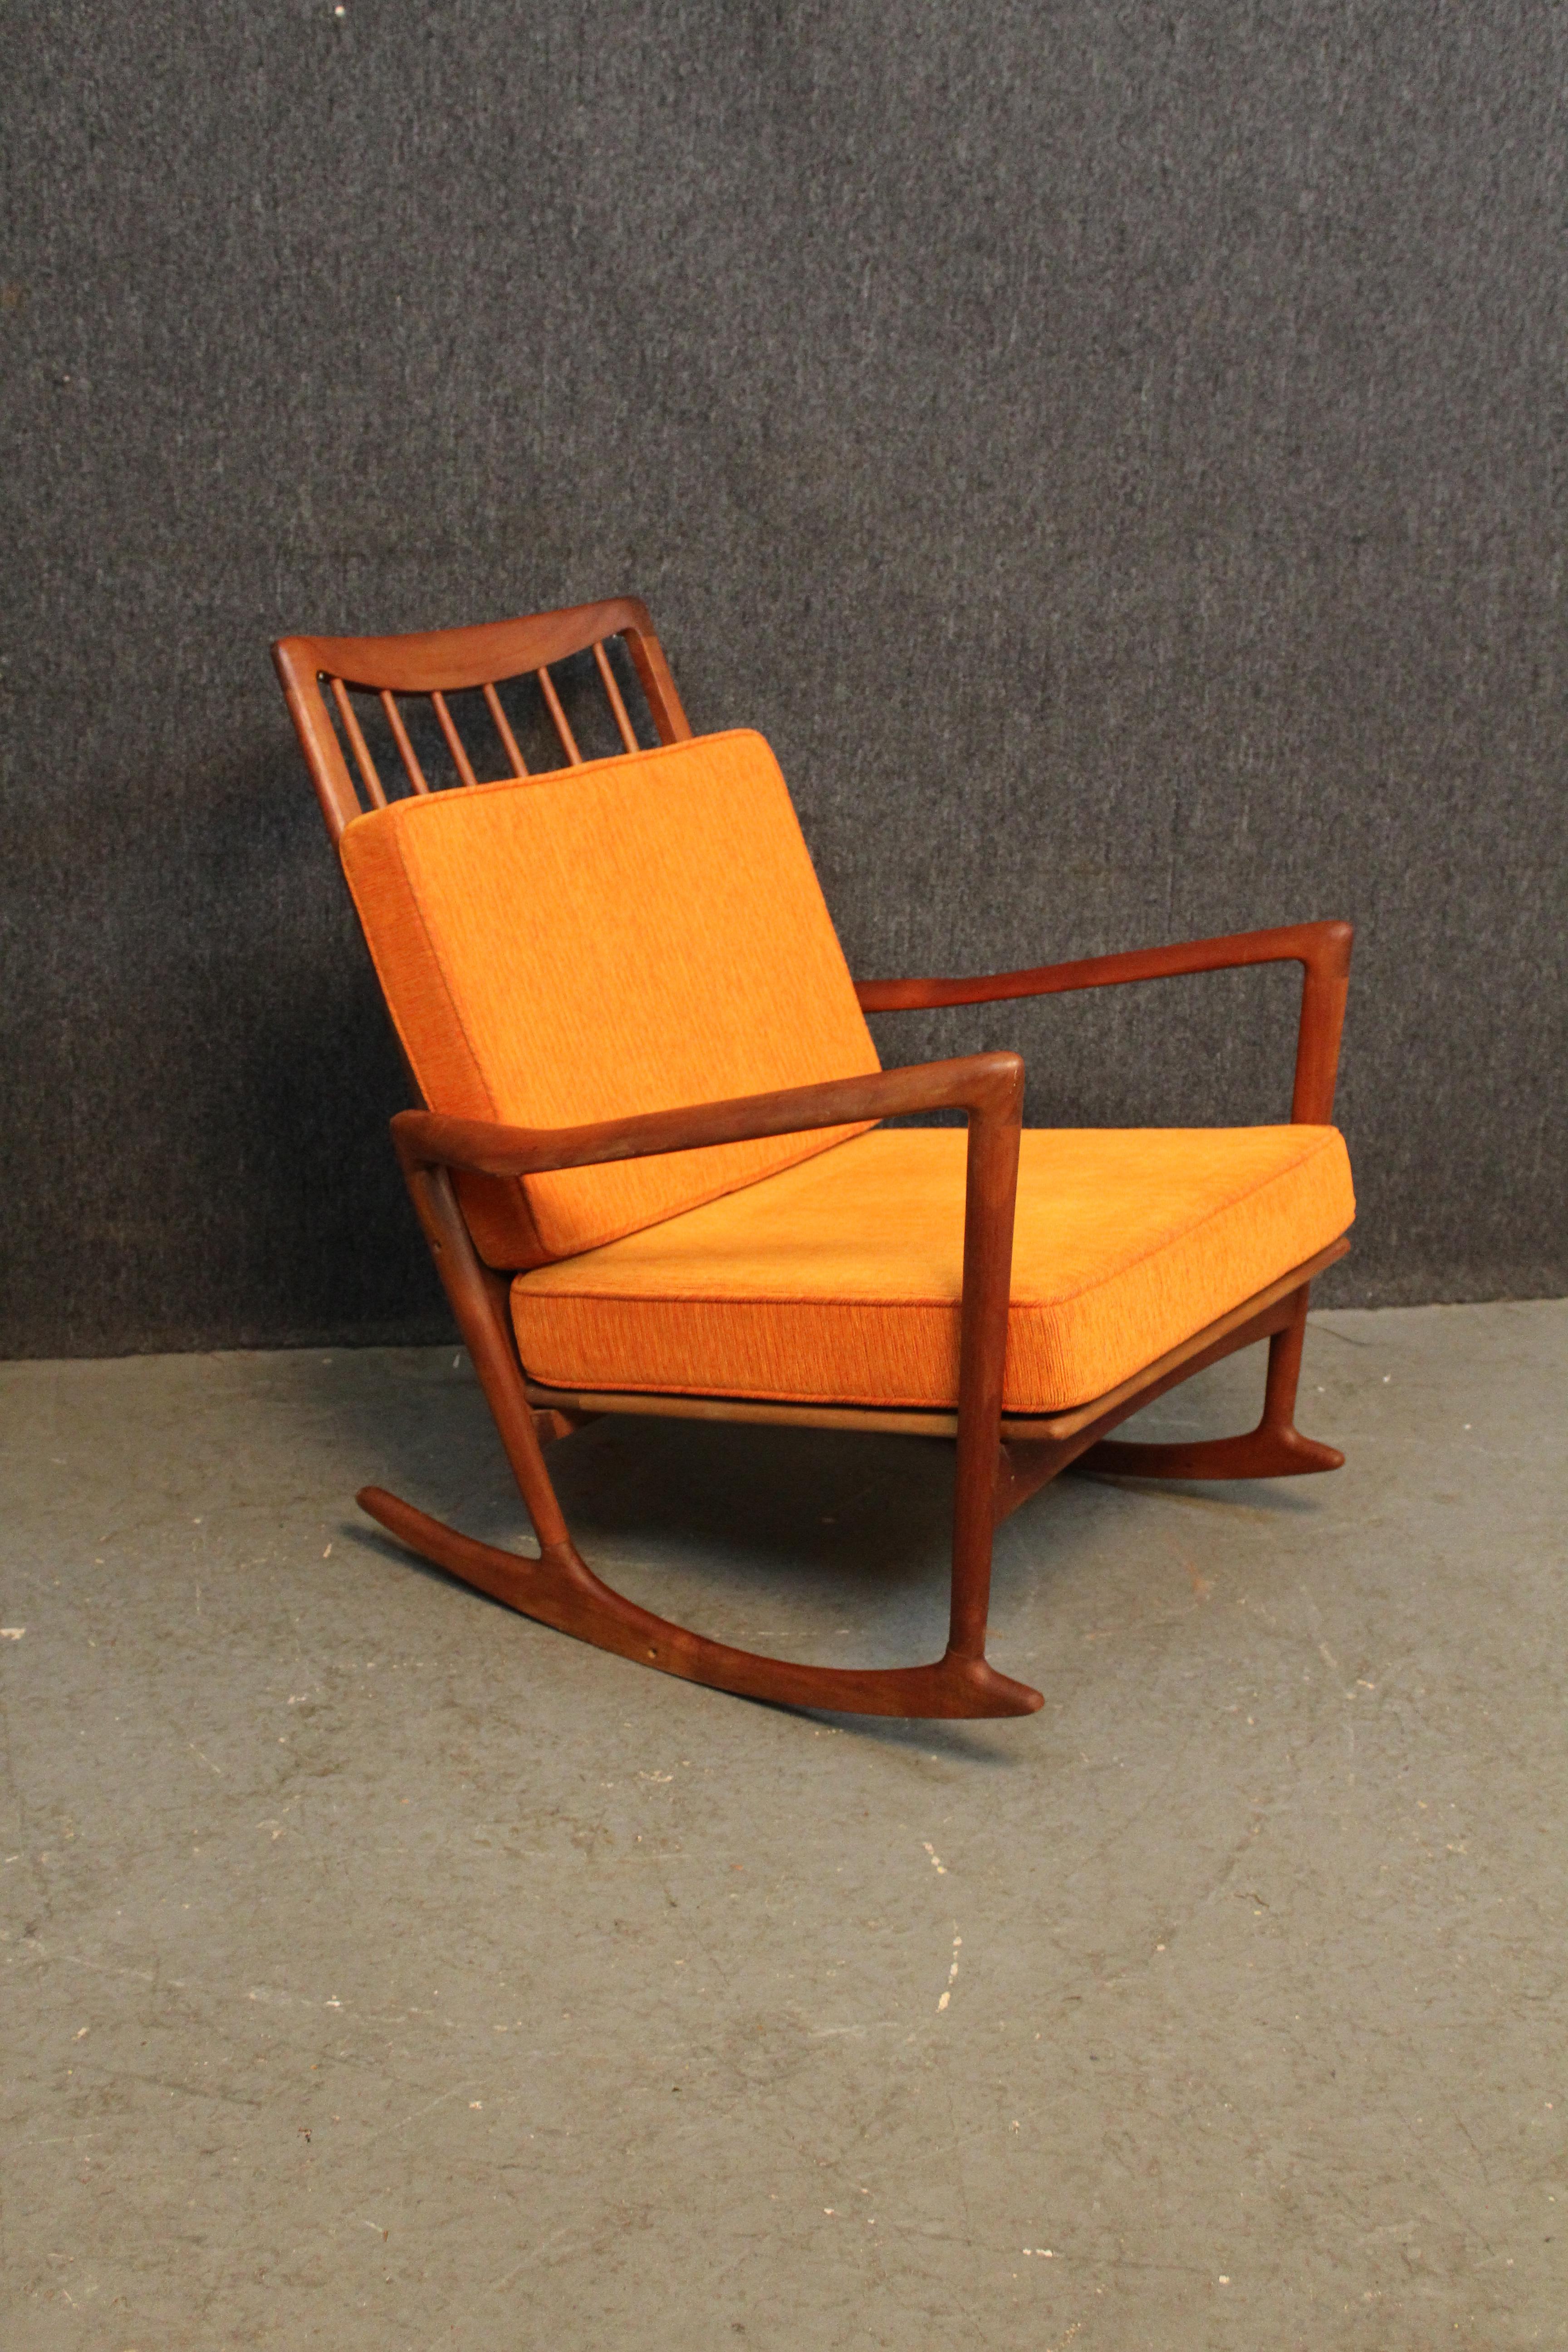 Bring home an iconic chair from one of the biggest names in Mid-Century Scandinavian Modern design with this breathtaking sculptural rocking chair made by Ib Kofod-Larsen for Selig of Denmark. With it's tall, spindle back, splayed boomerang